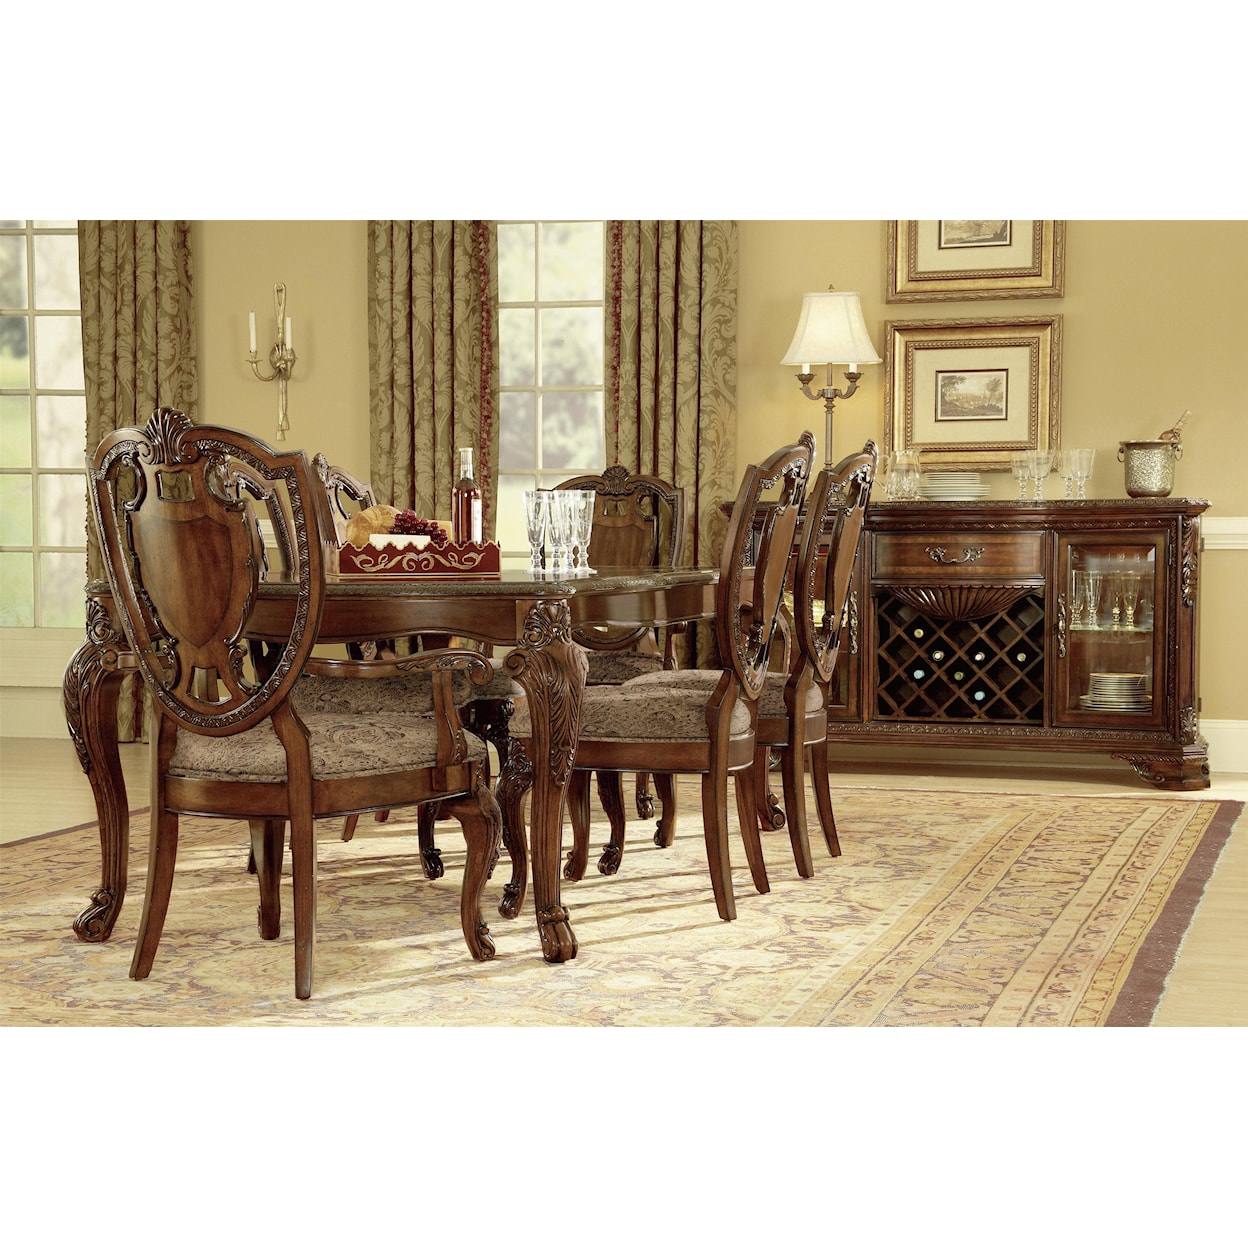 A.R.T. Furniture Inc Annabelle Formal Dining Room Group